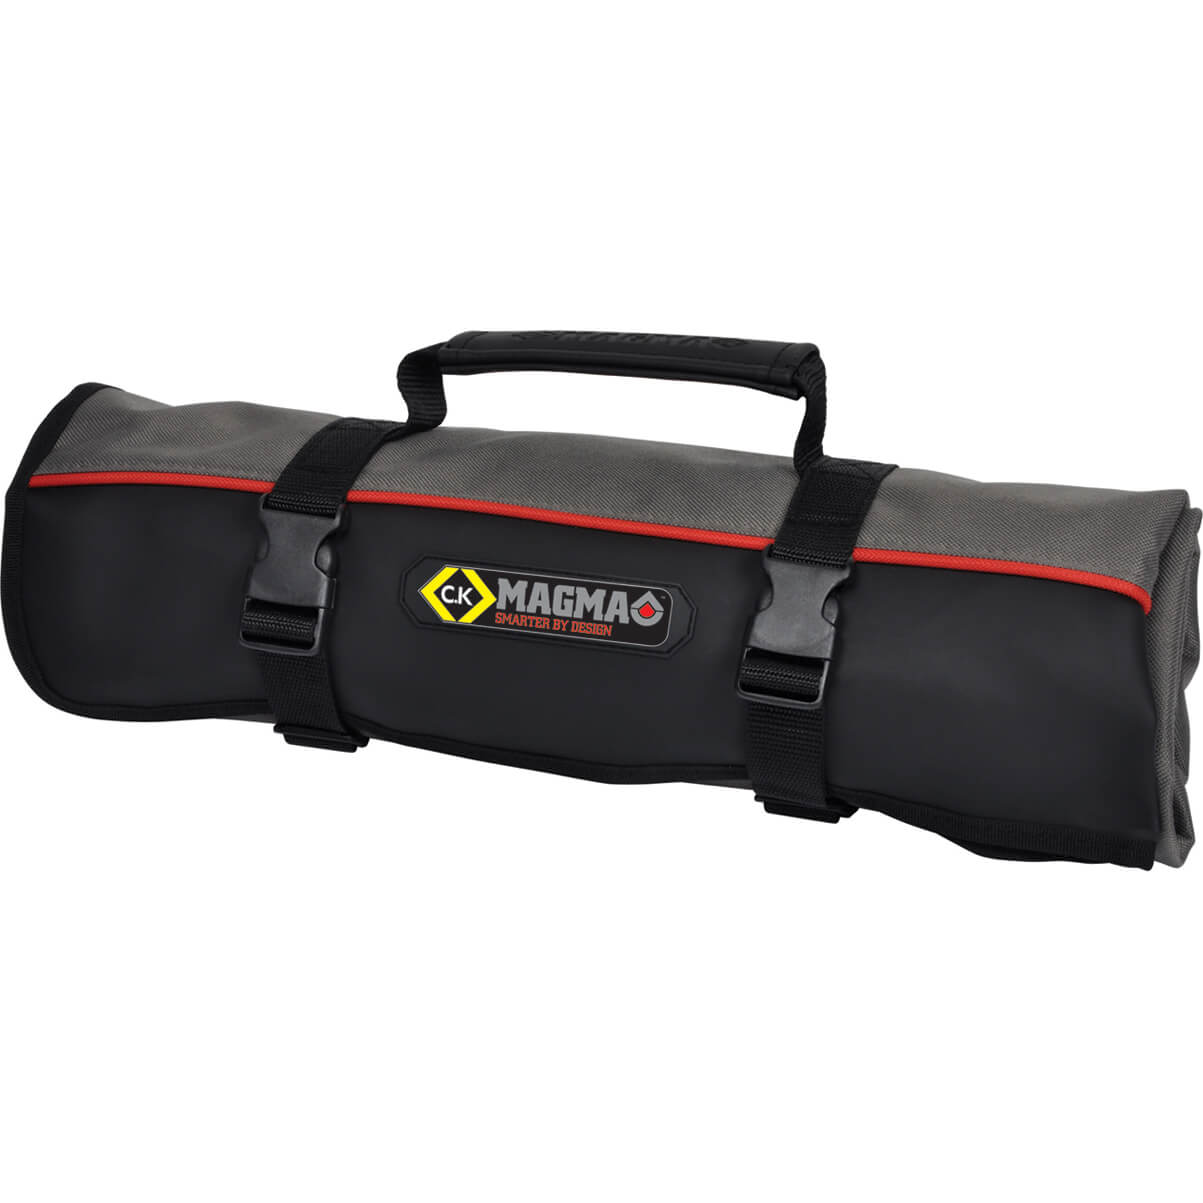 Image of CK Magma Tool Roll 30 Pockets